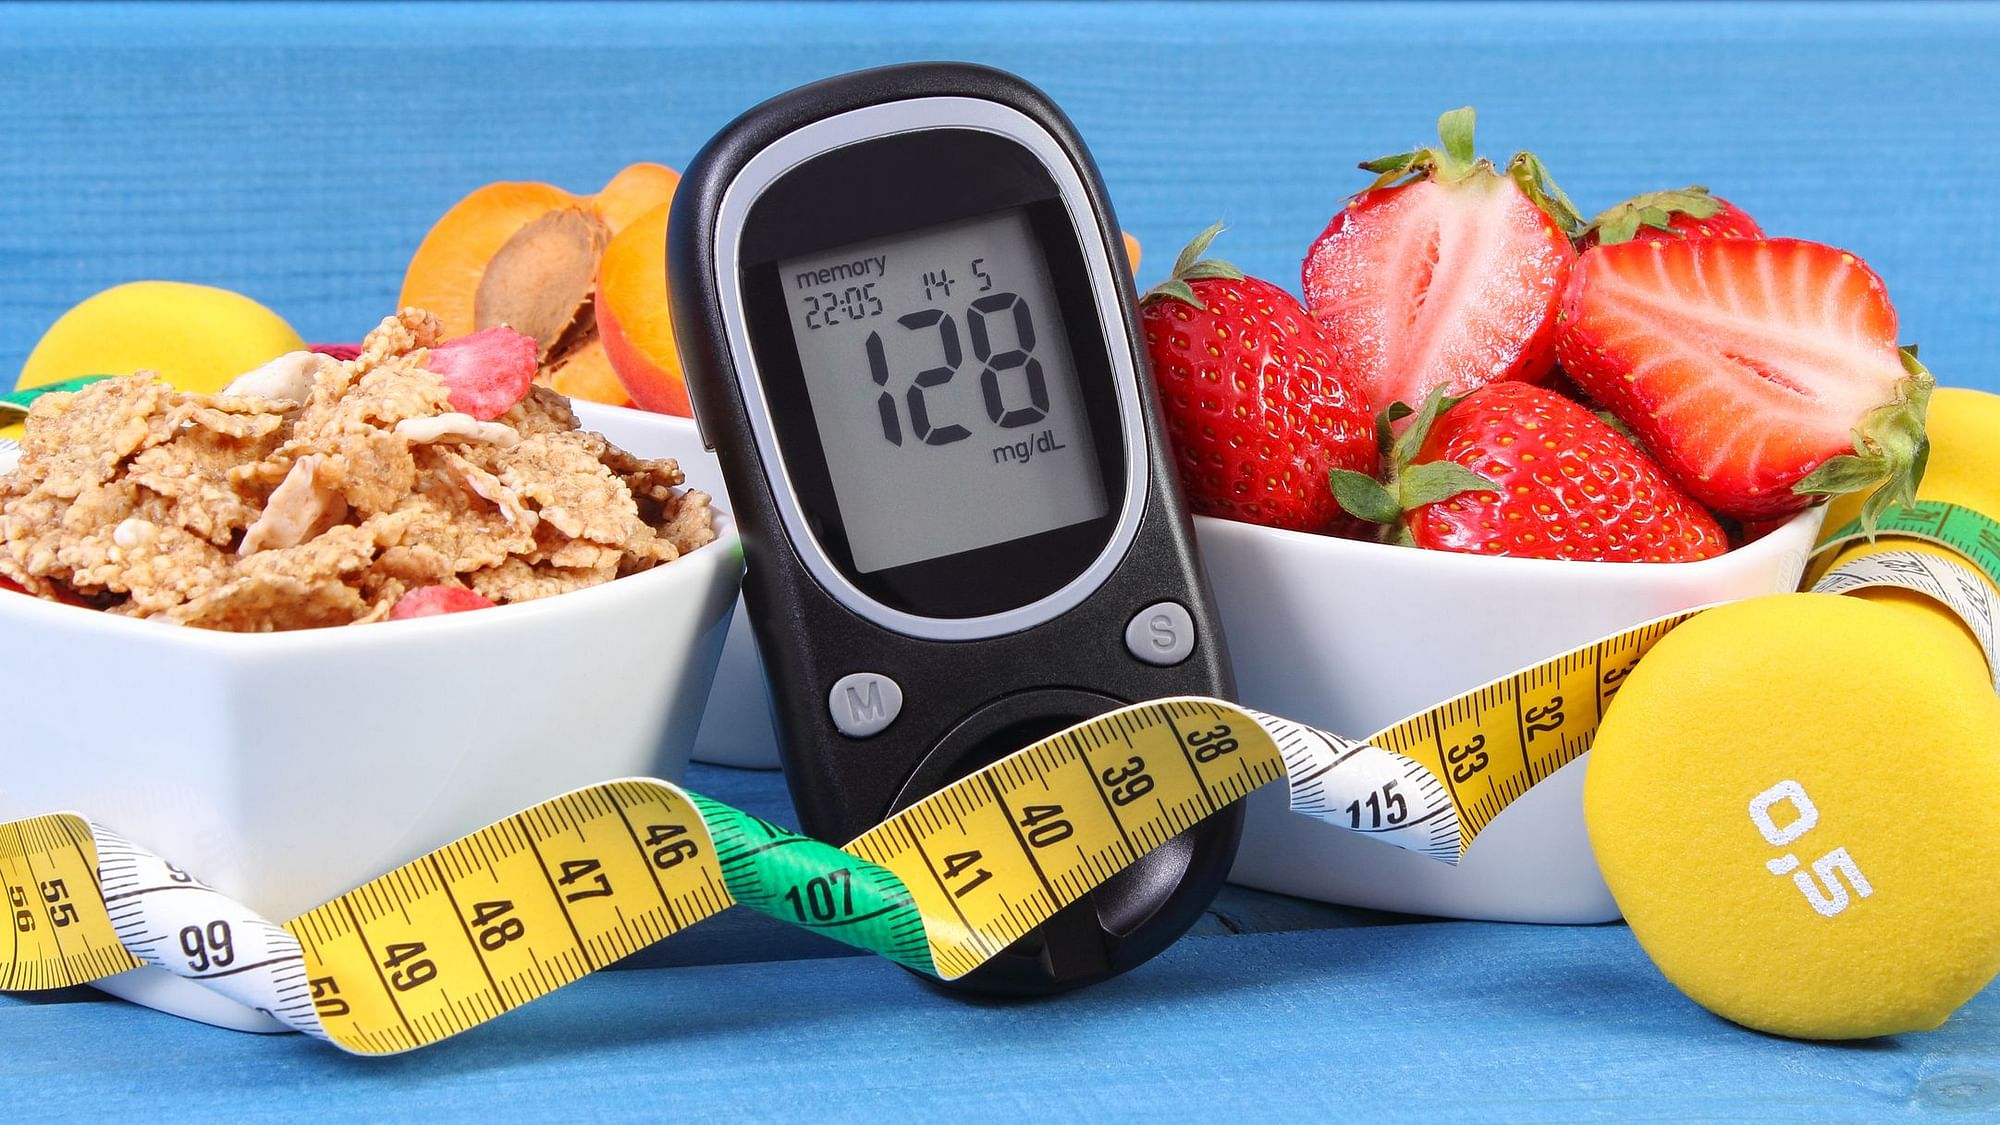 Did you know time management for eating can actually reduce the risk of developing diabetes?